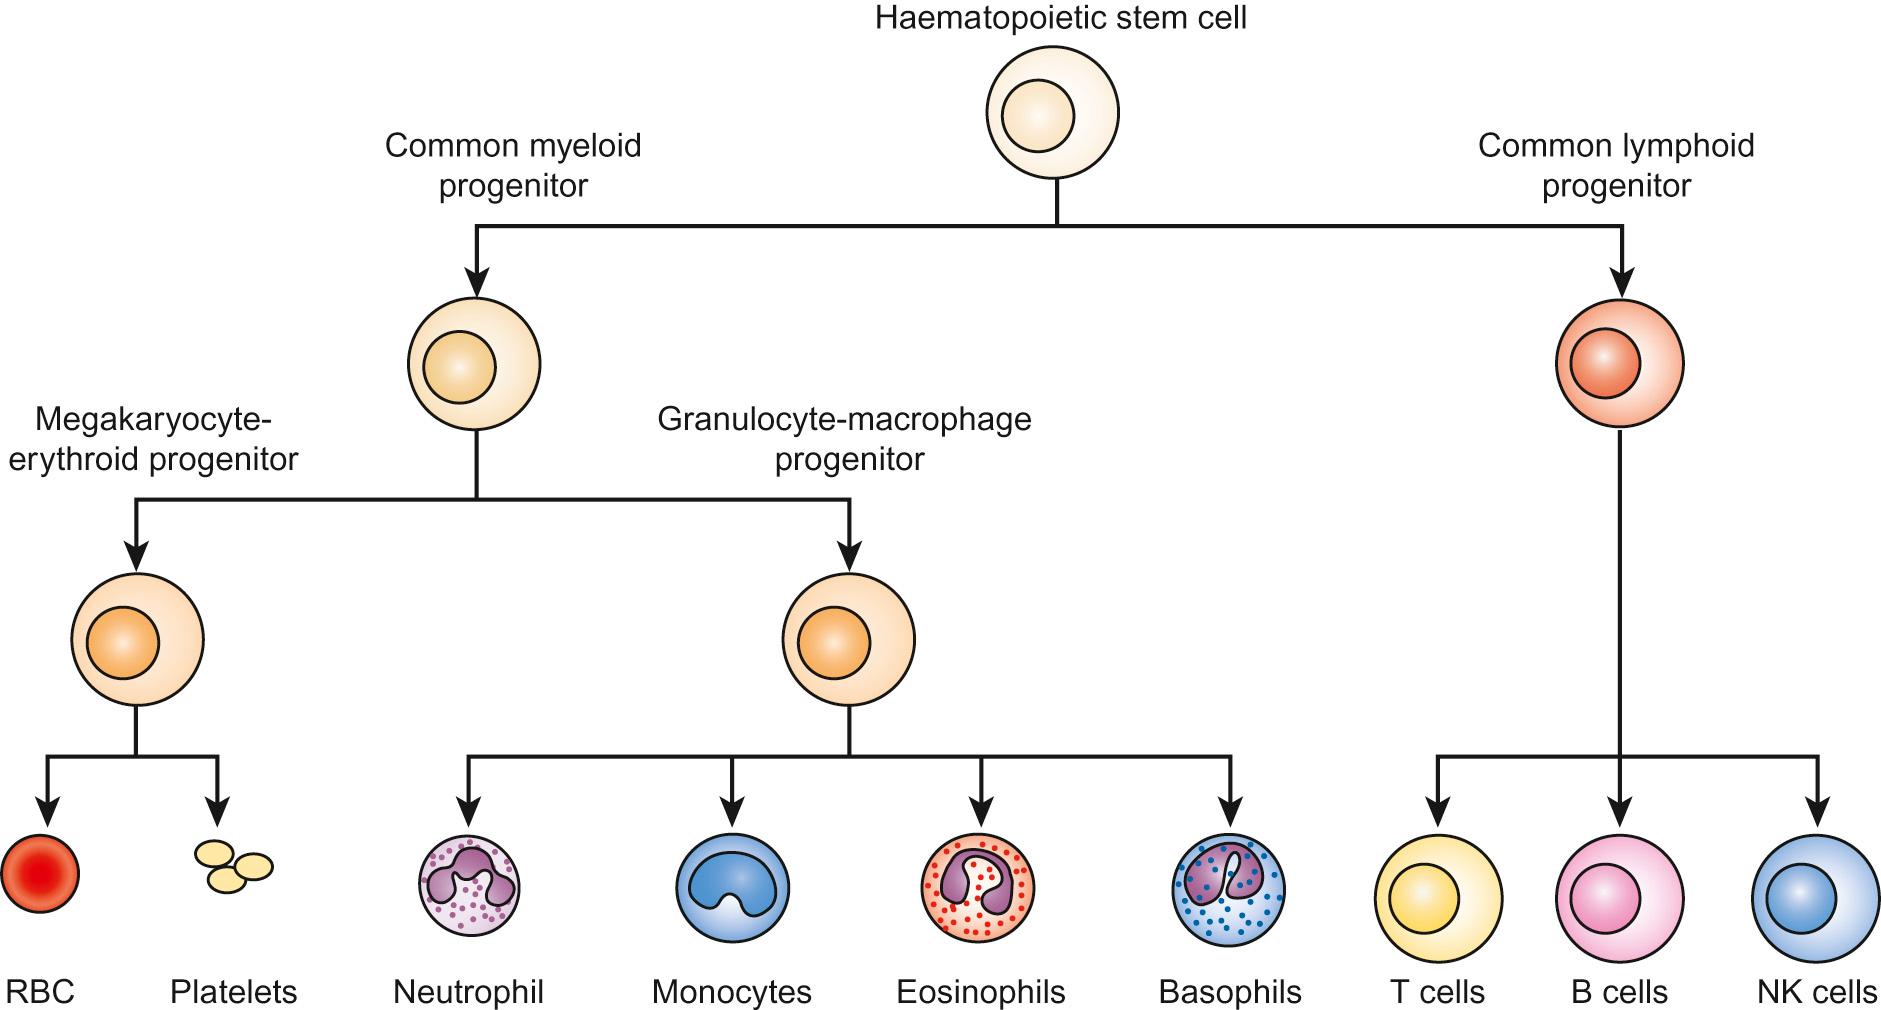 Fig. 23.1, Normal haematopoiesis: a hierarchy of haematopoietic stem cells, progenitor cells and mature blood cells of all lineages.